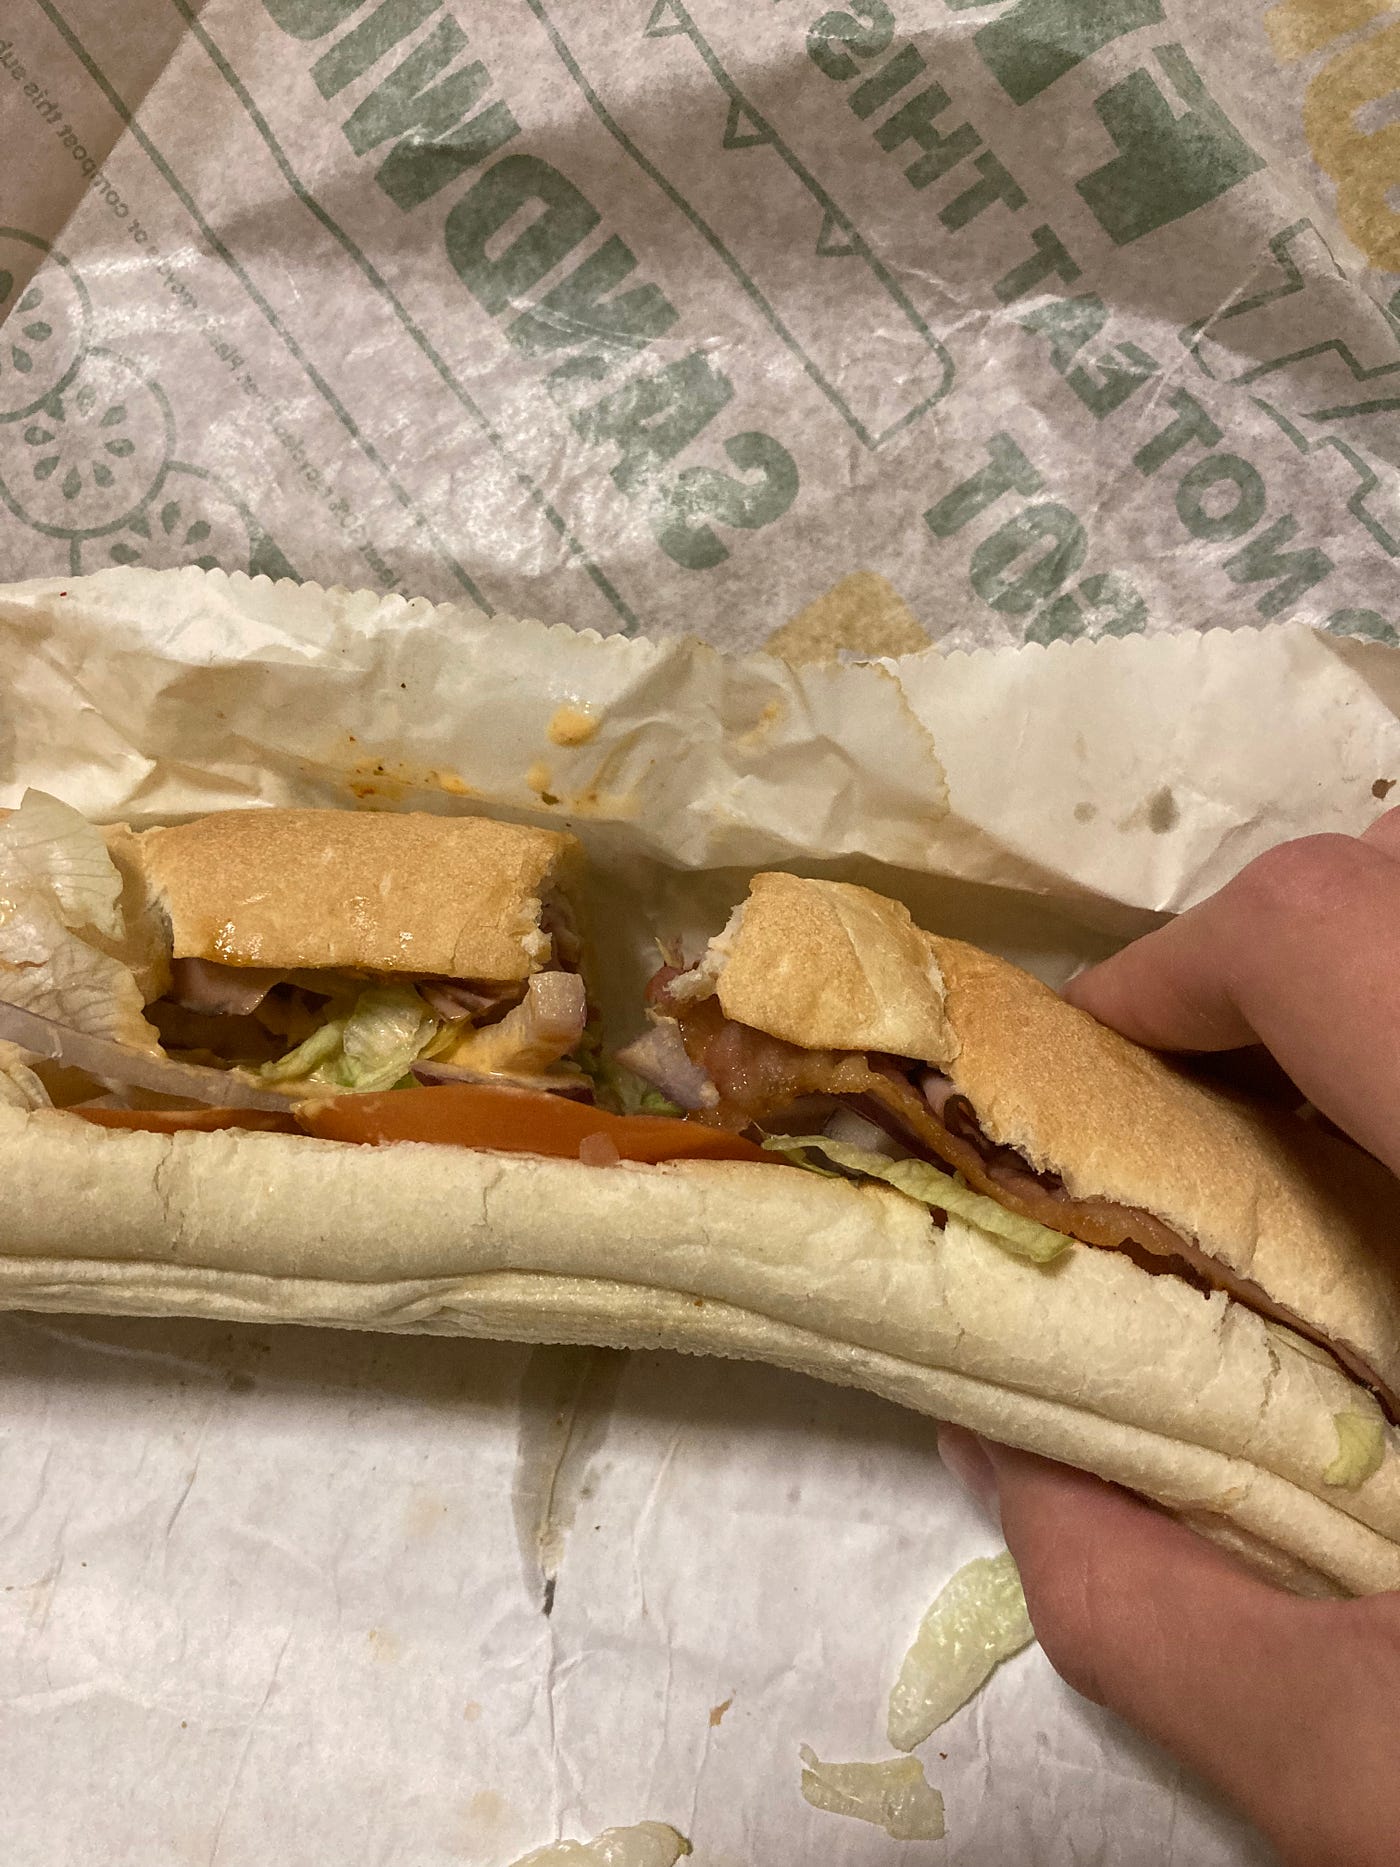 A Sub Above the Competitors? New Subway All American Club Review, by Dylan  Eagle